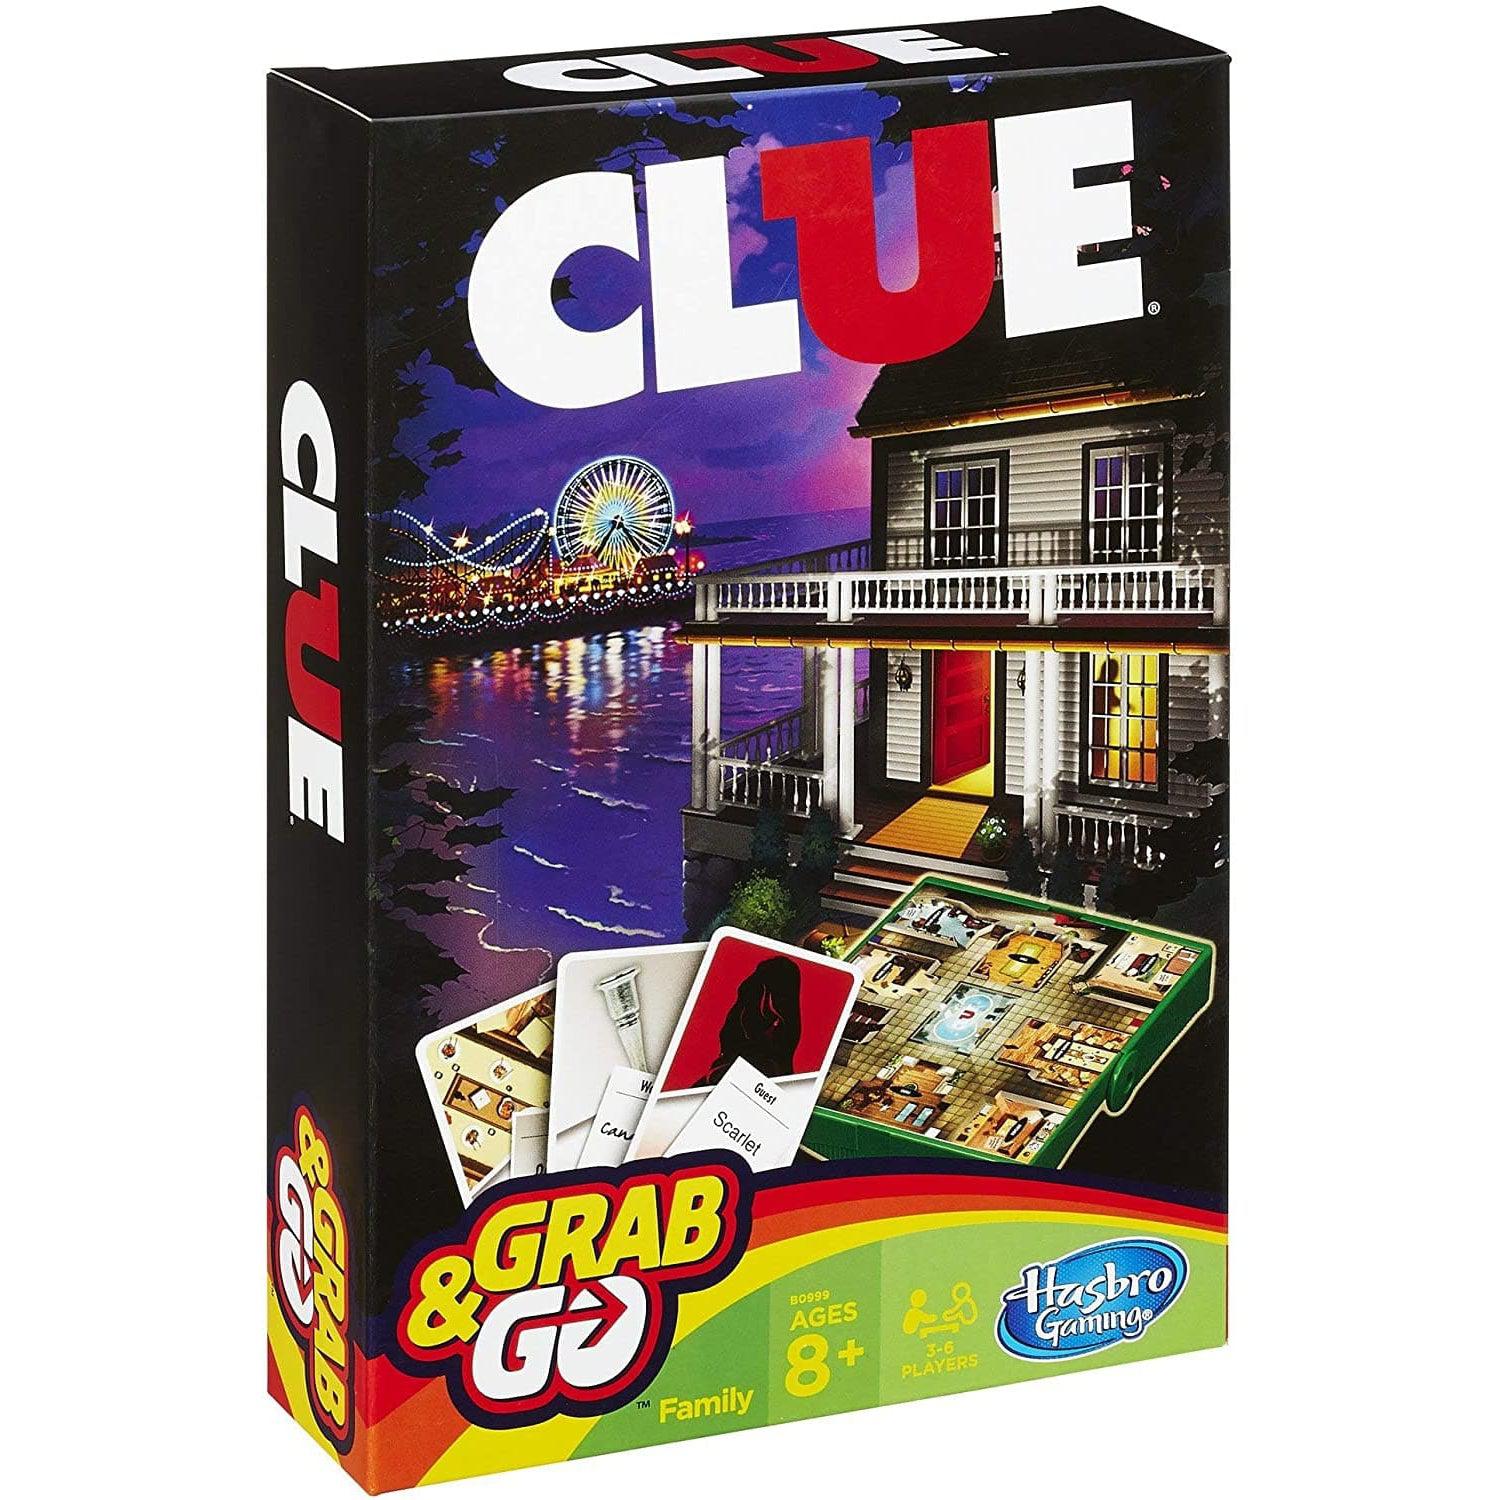 Monopoly Grab and Go Game for Ages 8 and Up, Travel Game for 2-4 Players -  Monopoly